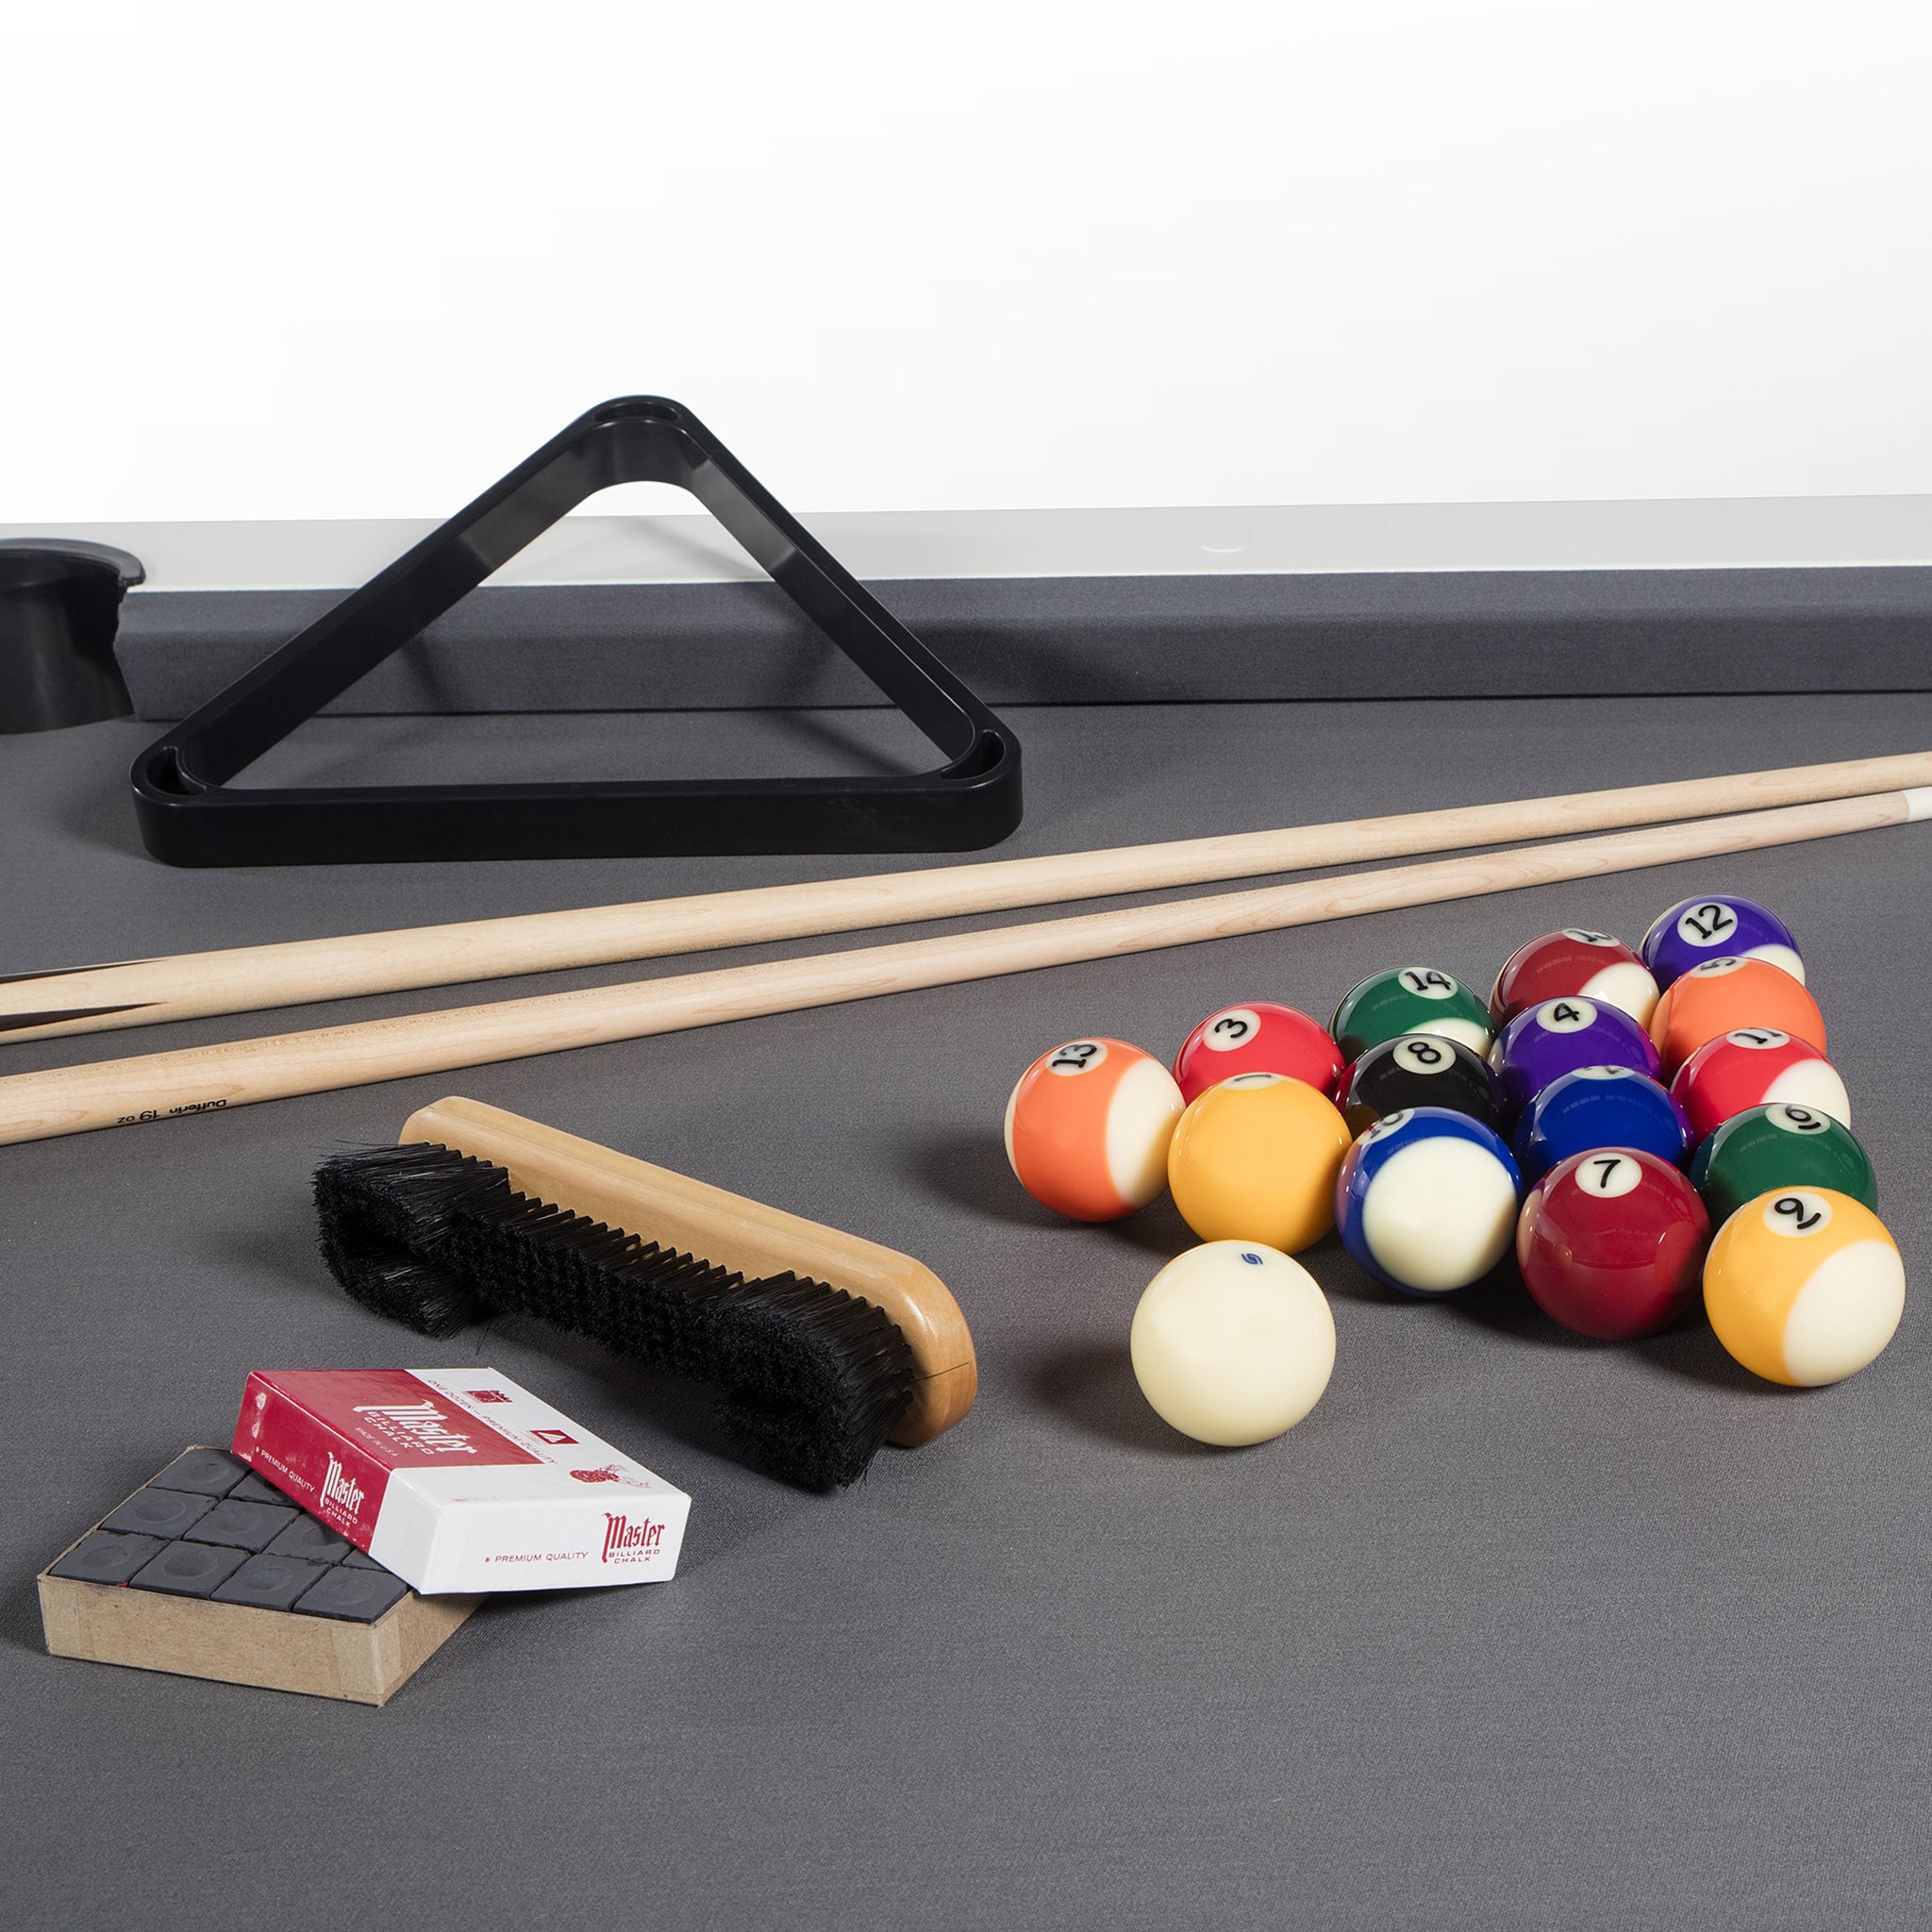 Diagonal 'Outdoor' American Pool Table in 7ft, 8ft